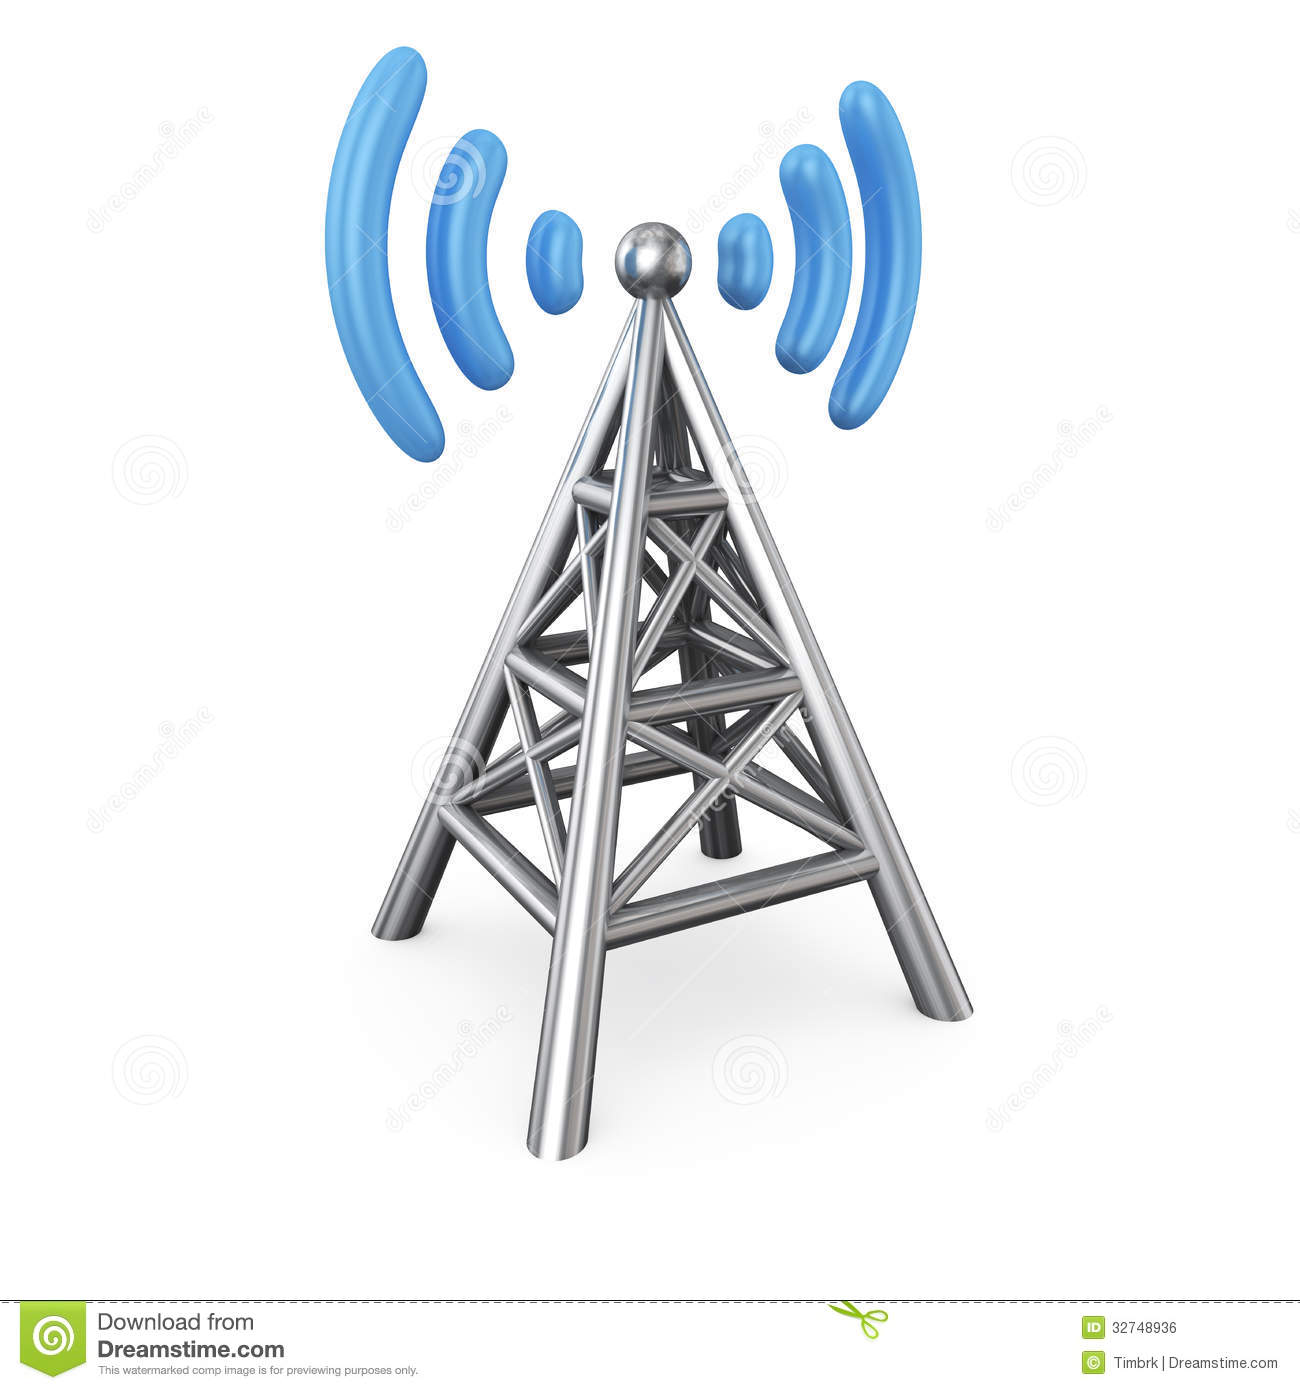 Showing post & media for Mobile antenna symbol.